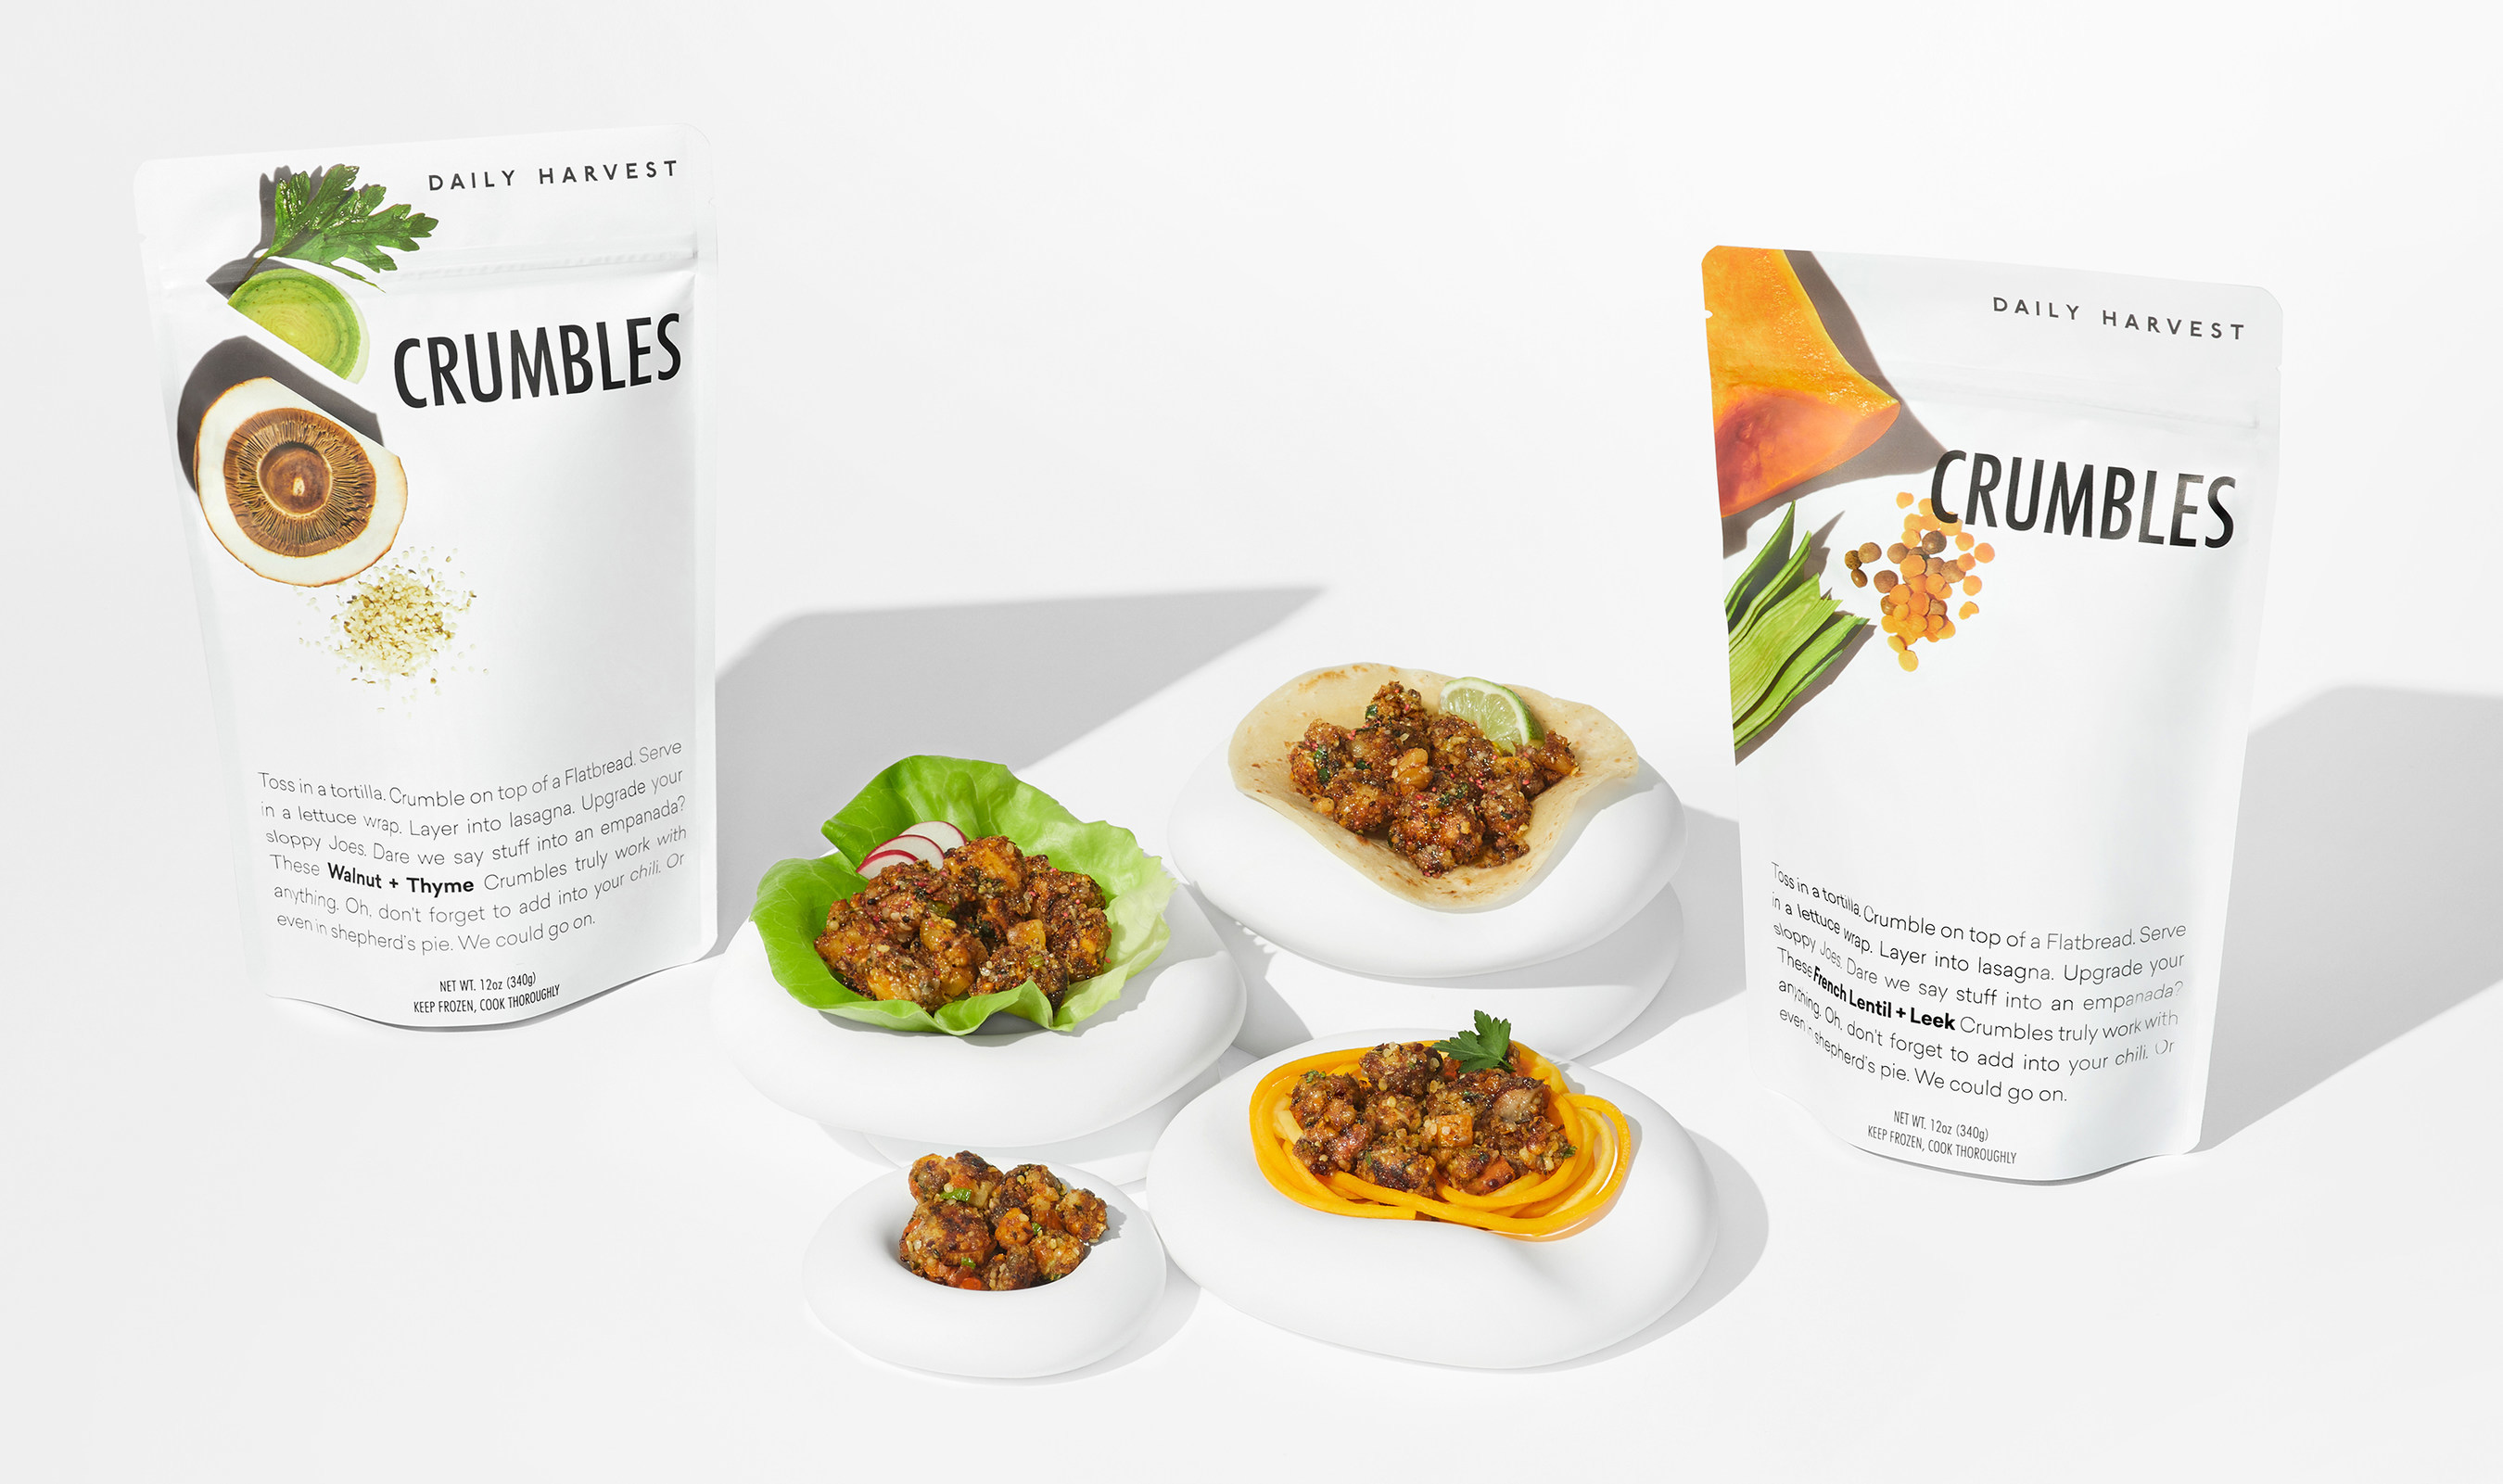 a promotional image showing two bags of Daily Harvest’s Crumbles, a plant-based protein product; between them are four dishes using the Crumbles